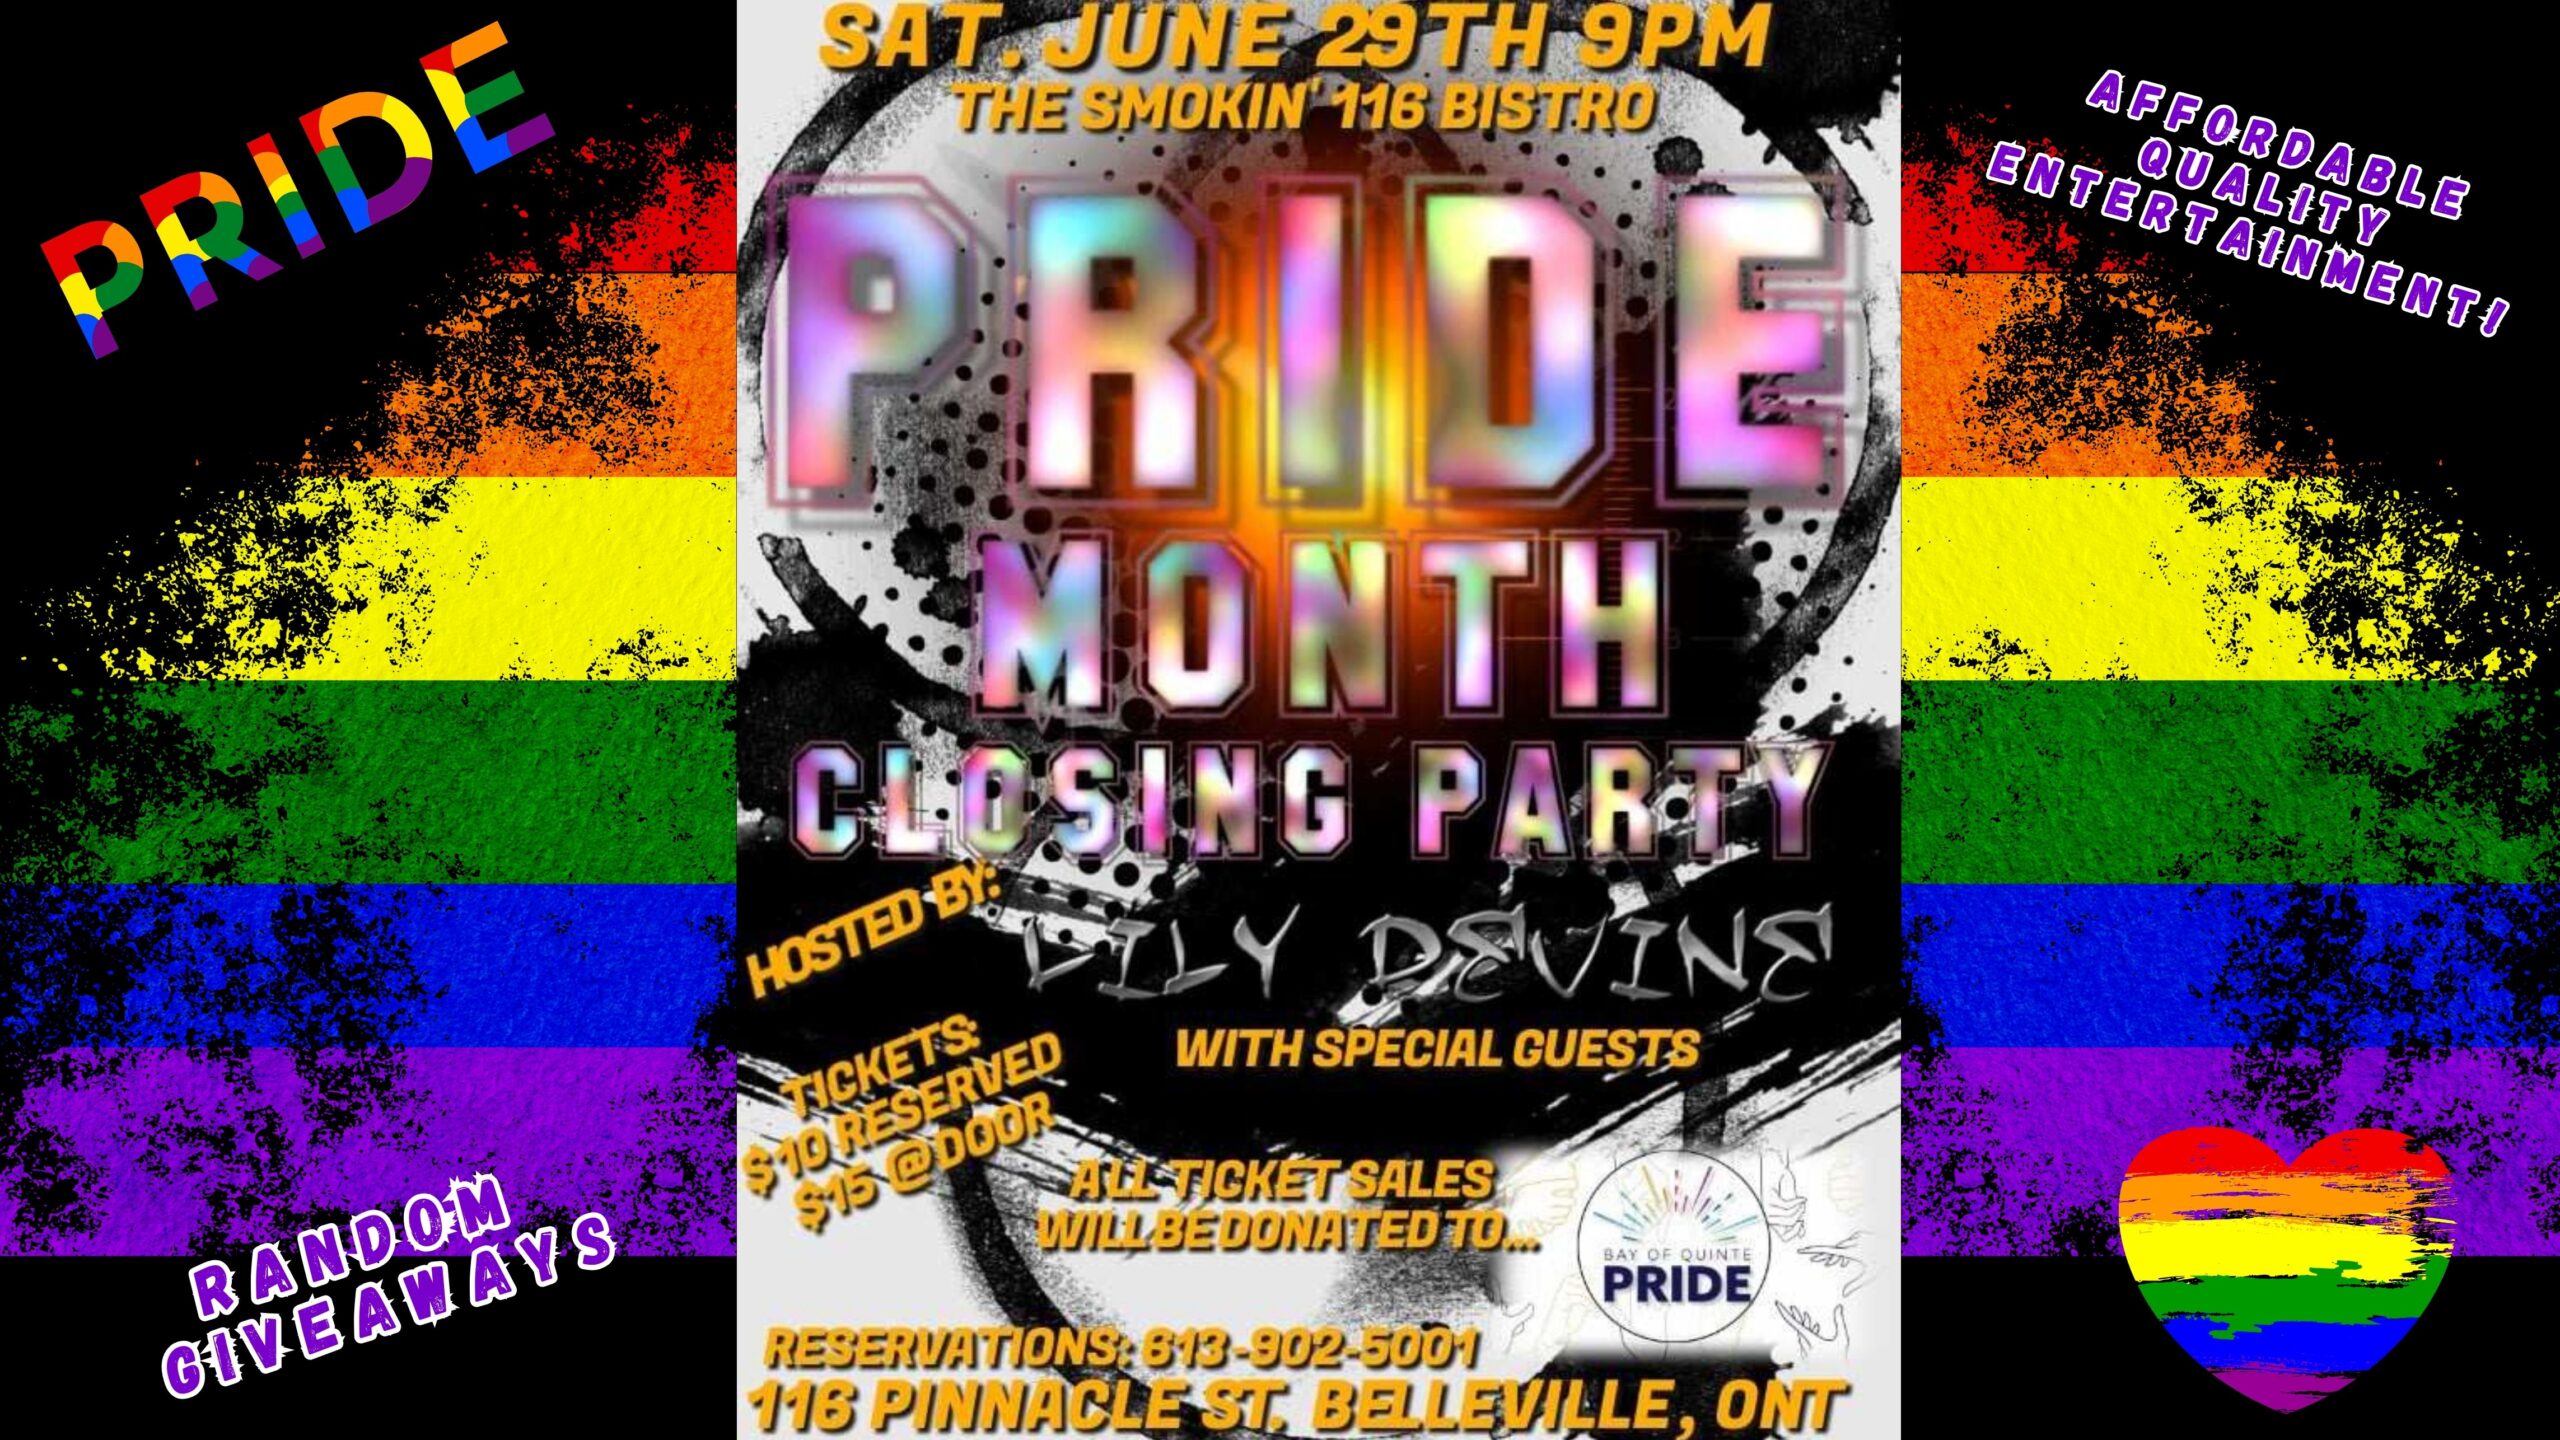 poster for event Titled "Pride Month Closing Party" with photos of pride flag.